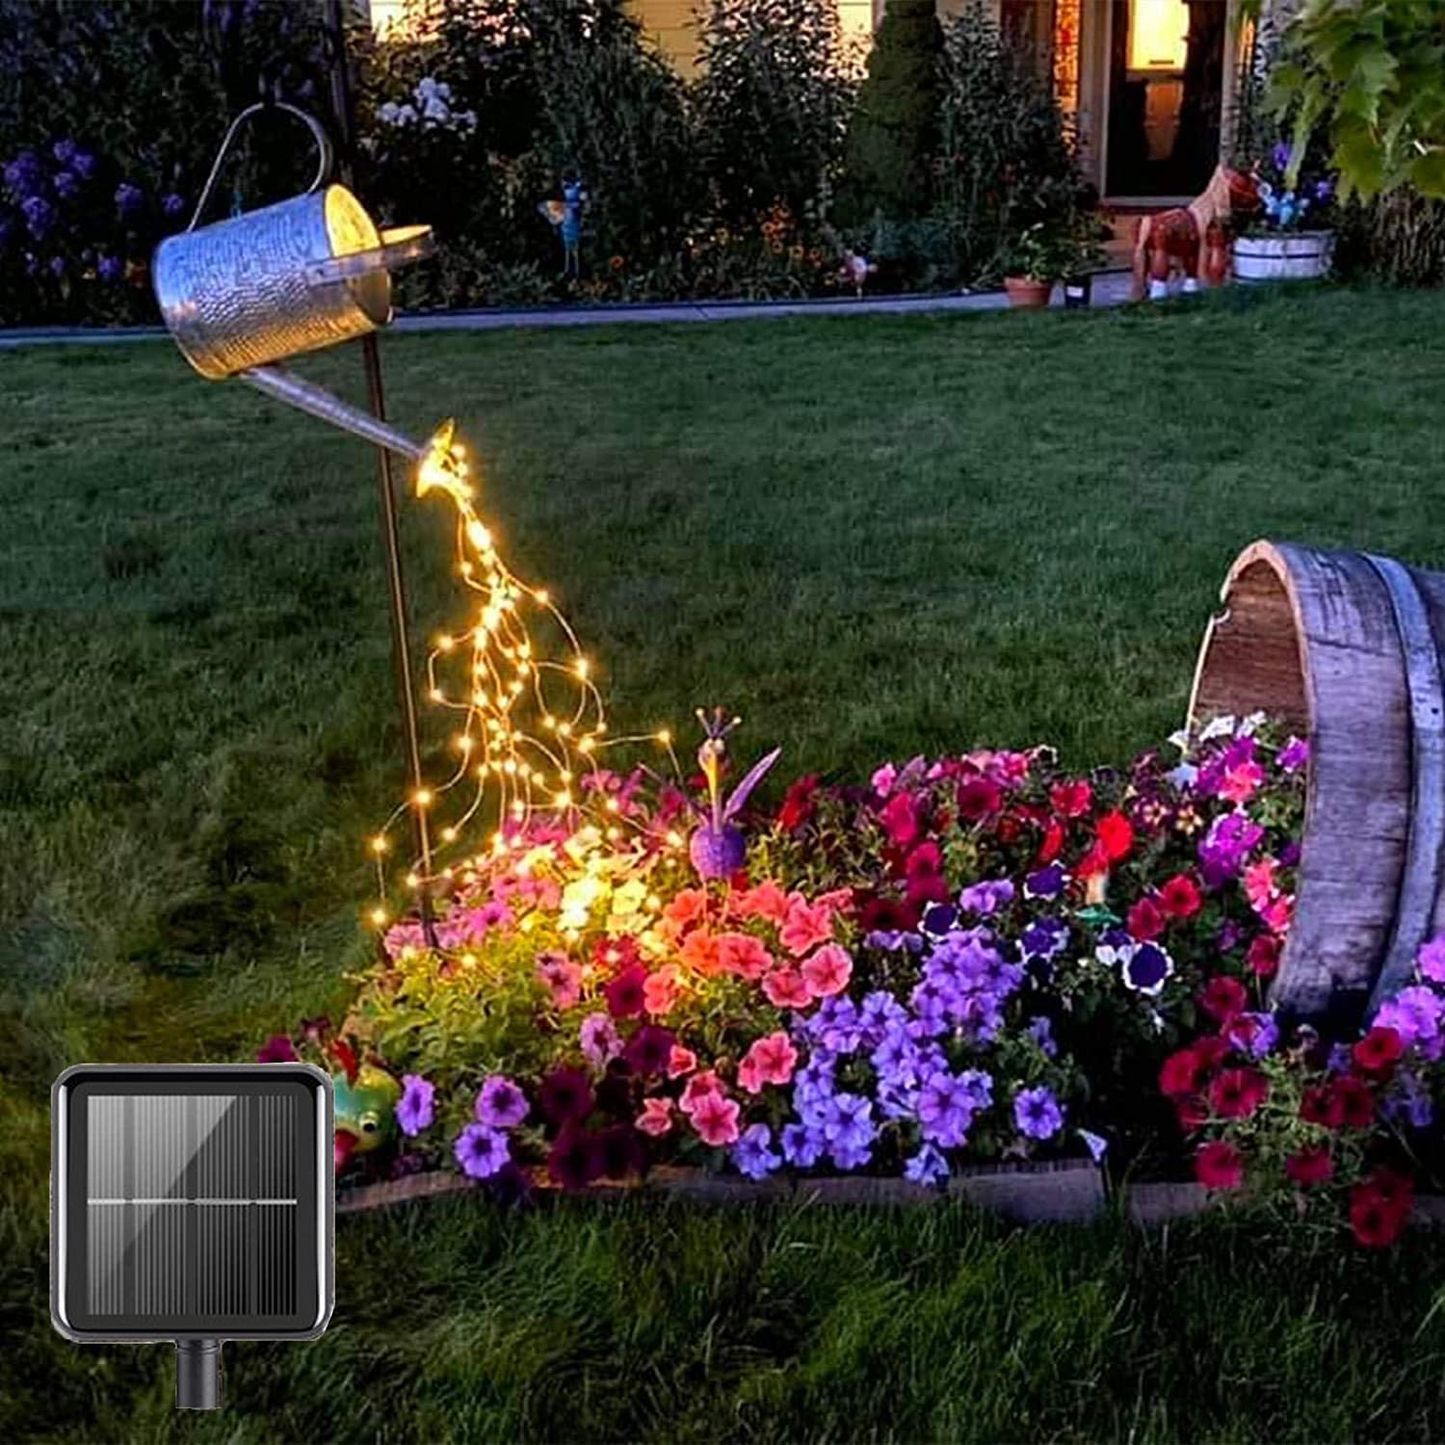 YITING Solar Waterfall Fairy Bunch Lights Outdoor Waterproof,200 Leds 8 Modes Watering Can Light (No Watering Can), Solar Powered Firefly Moon Plants Christmas Tree Vines Decorations